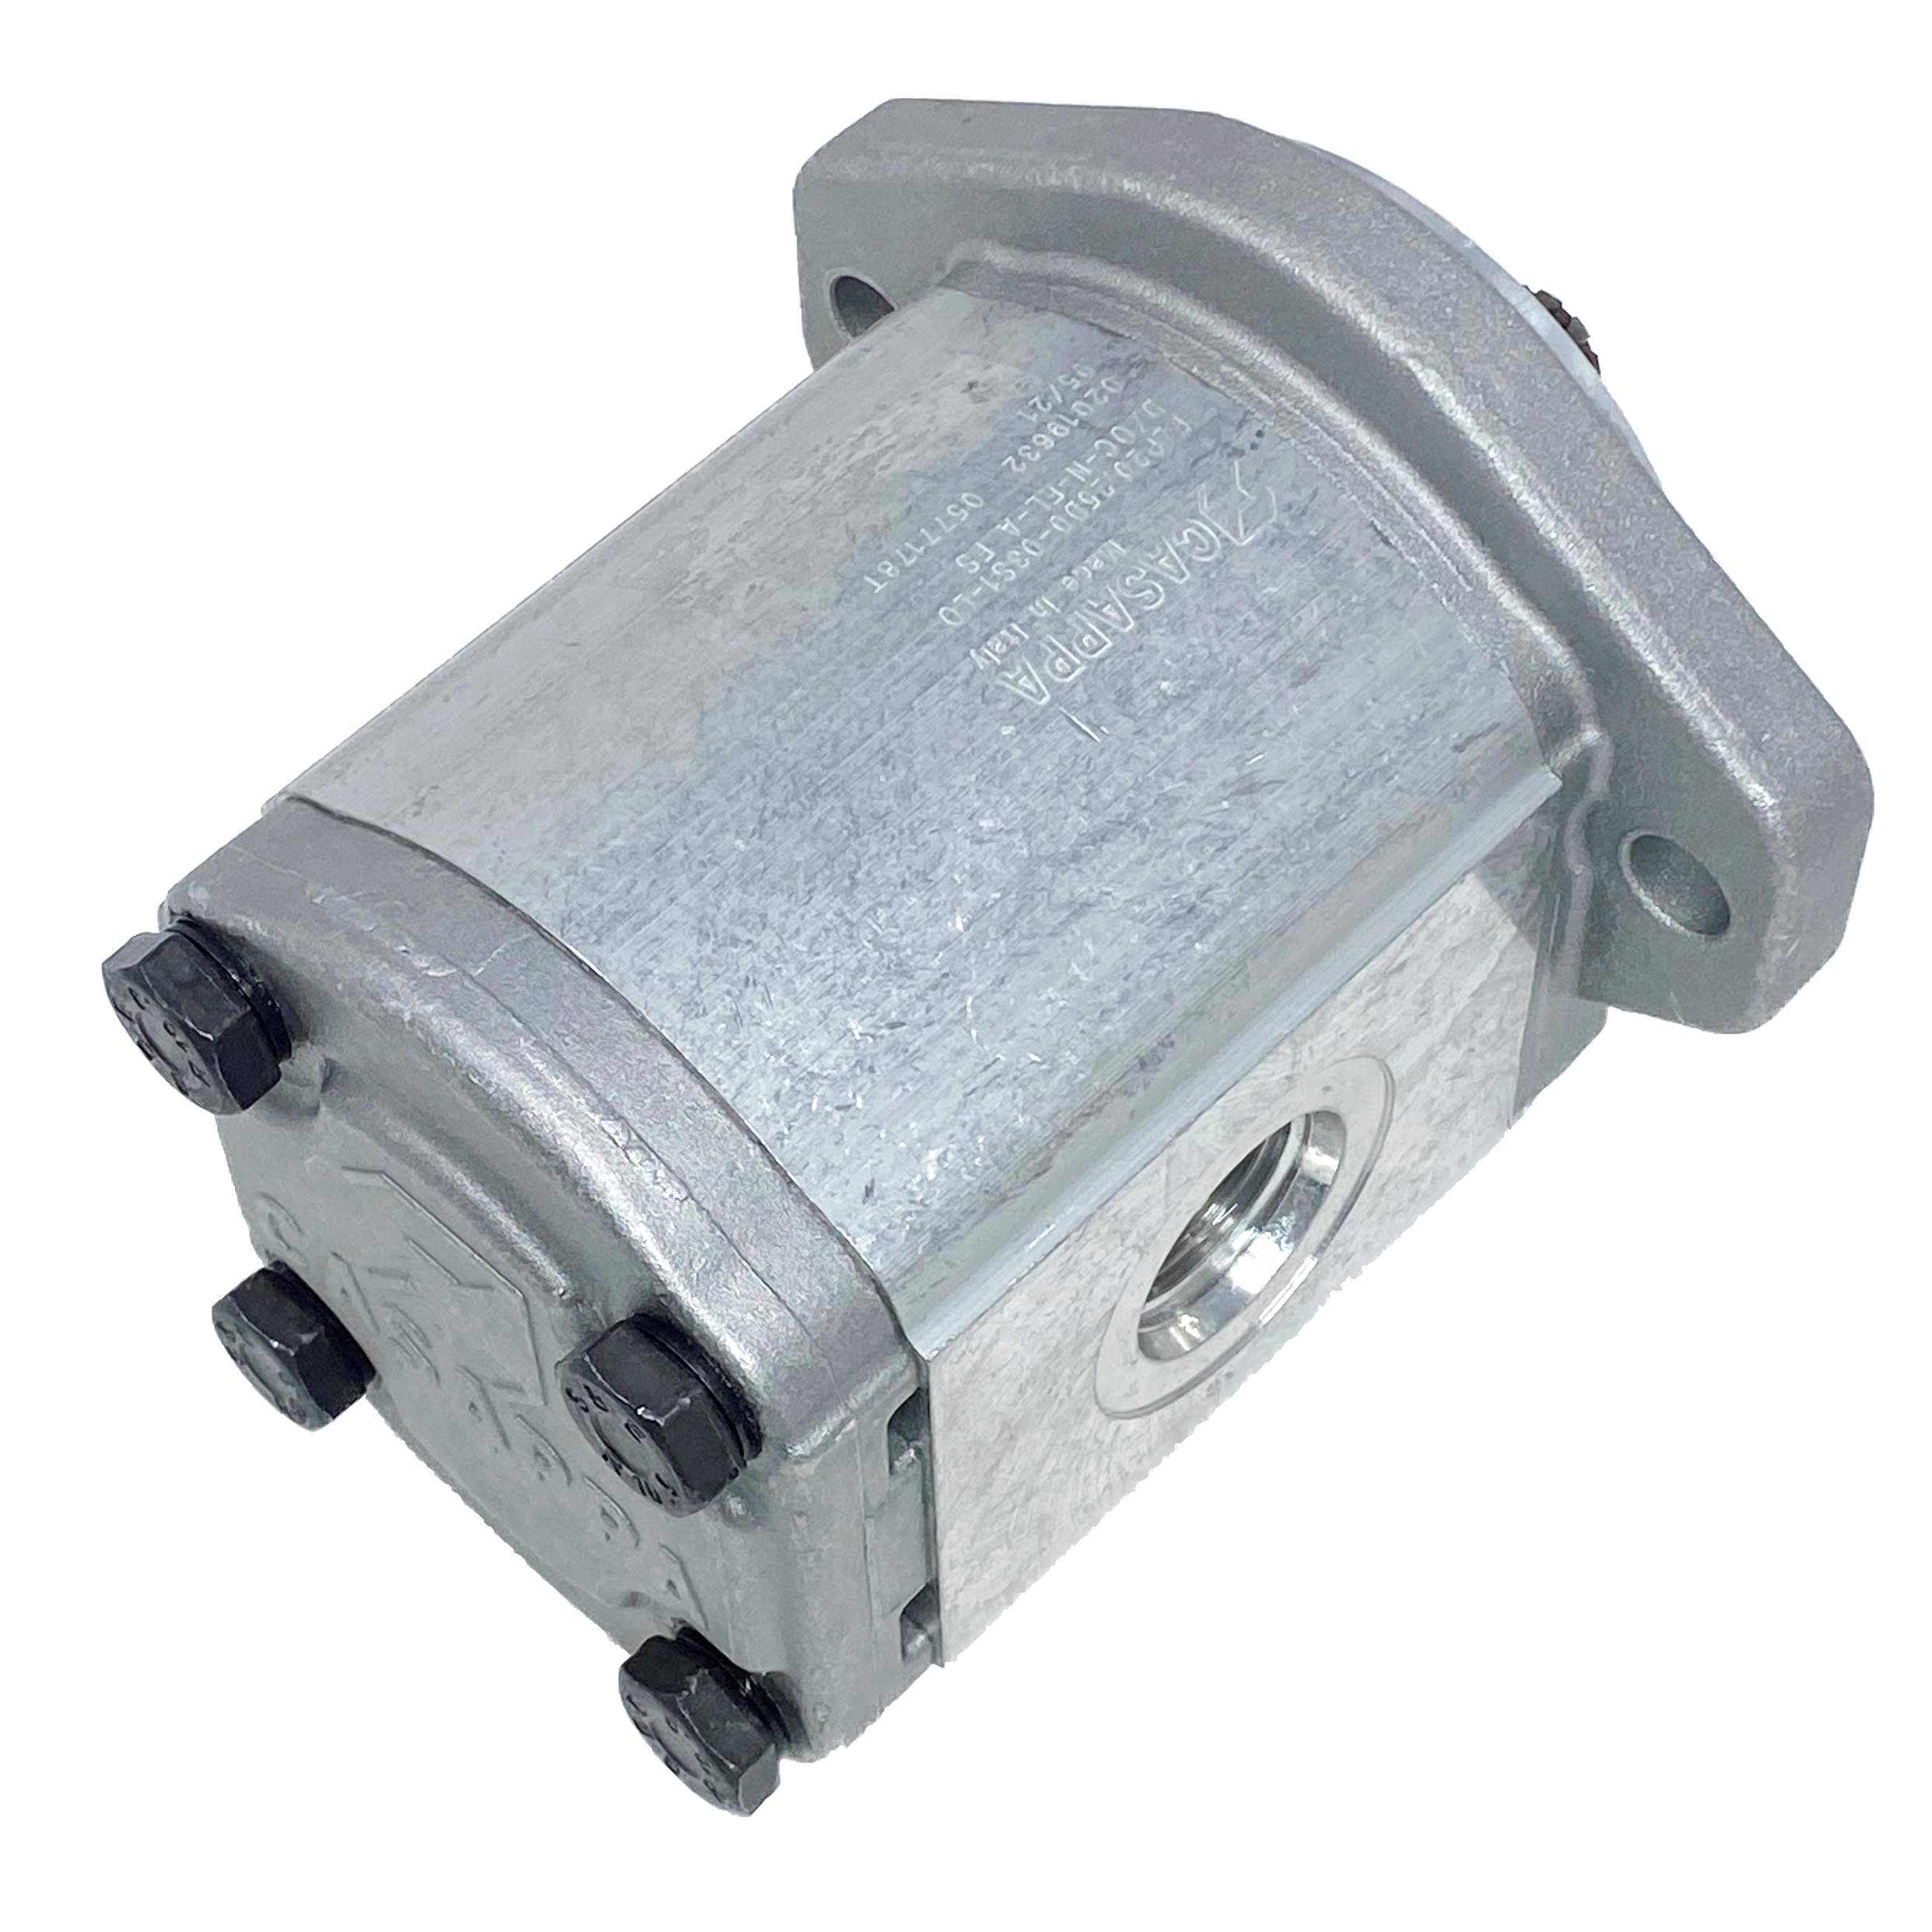 PHP20.27,8S0-03S9-LOG/OC-N-EL : Casappa Polaris Gear Pump, 28.21cc, 2900psi Rated, 2500RPM, CCW, 9T 16/32dp Shaft, SAE A 2-Bolt Flange, 1.25" #20 SAE Inlet, 0.625 (5/8") #10 SAE Outlet, Cast Iron Body, Aluminum Flange